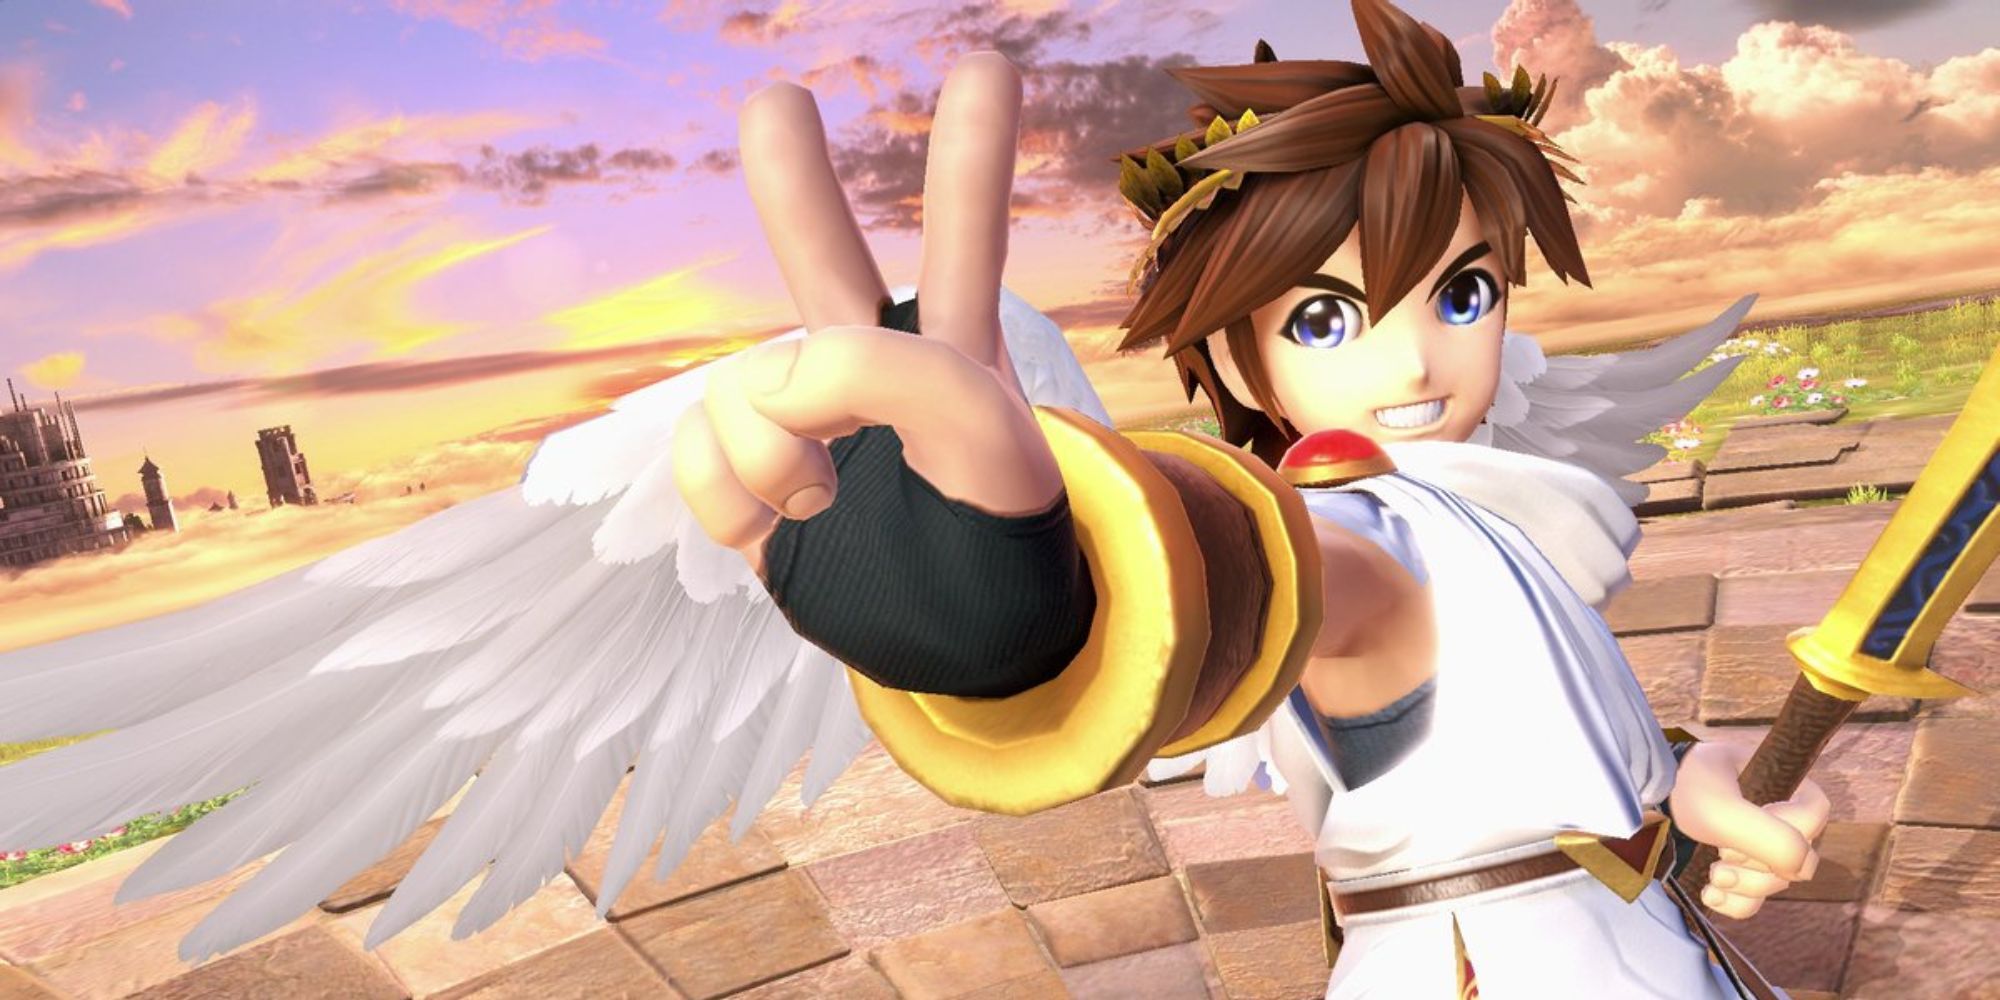 Pit's victory pose in Super Smash Bros. Ultimate.